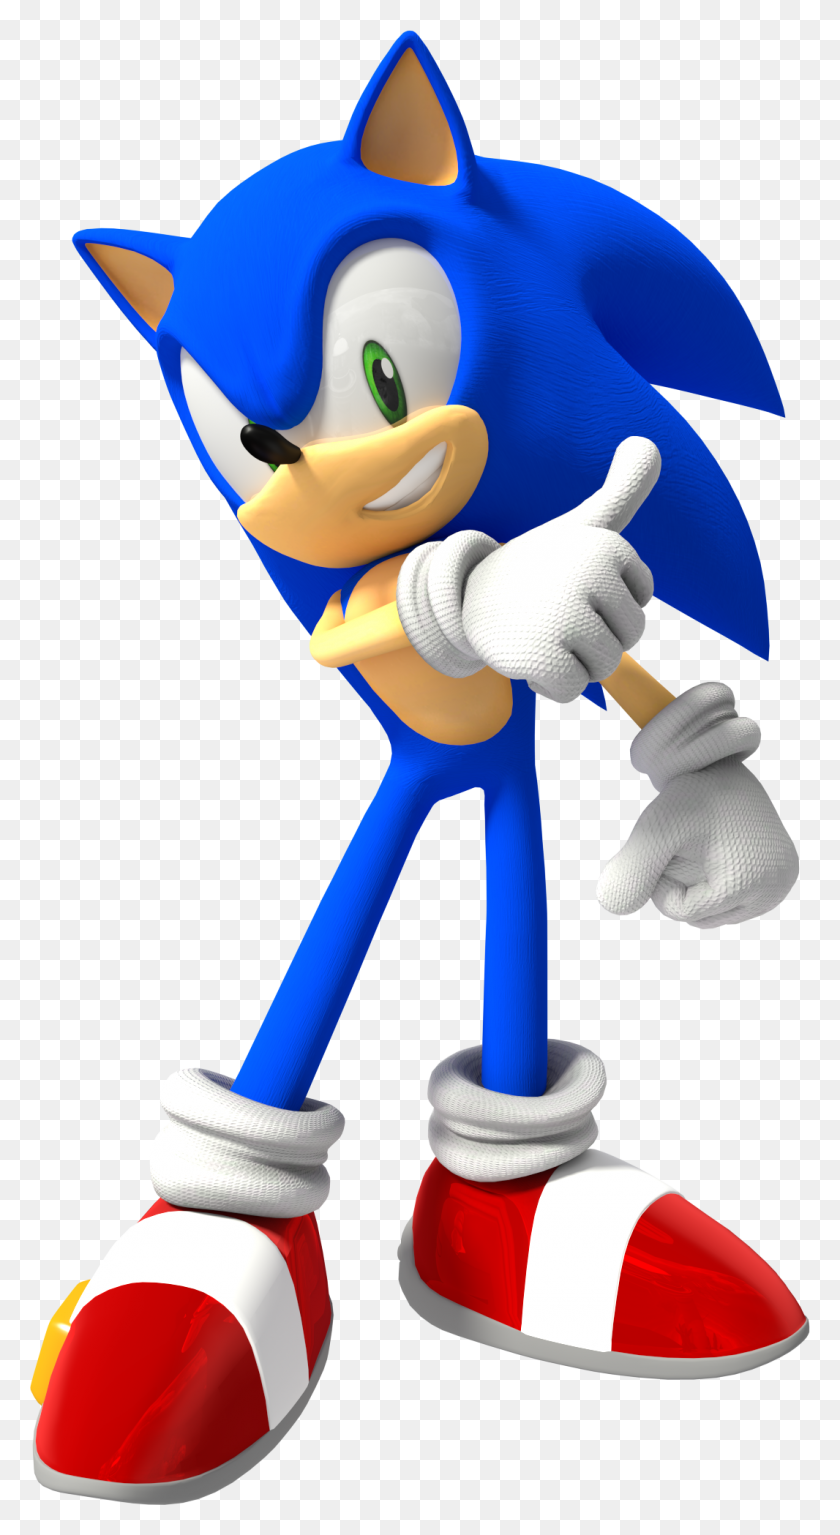 1066x2016 Sonic Hd Png Transparent Sonic Hd Images - Sonic The Hedgehog PNG